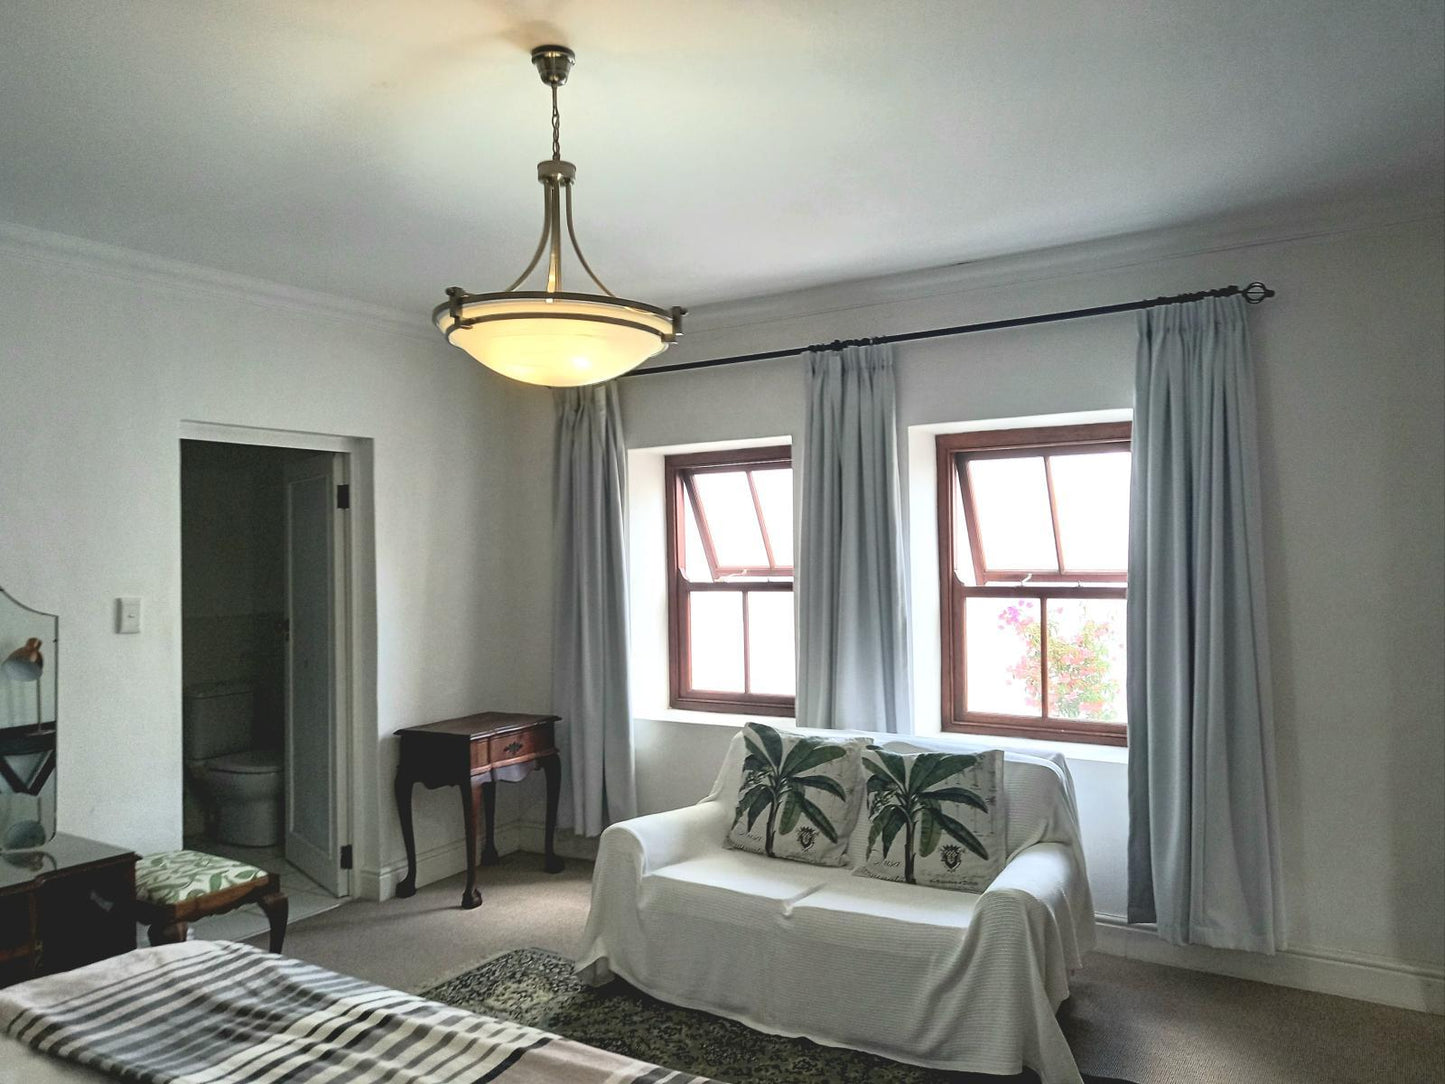 Self-Catering - Amber @ Paternoster Place